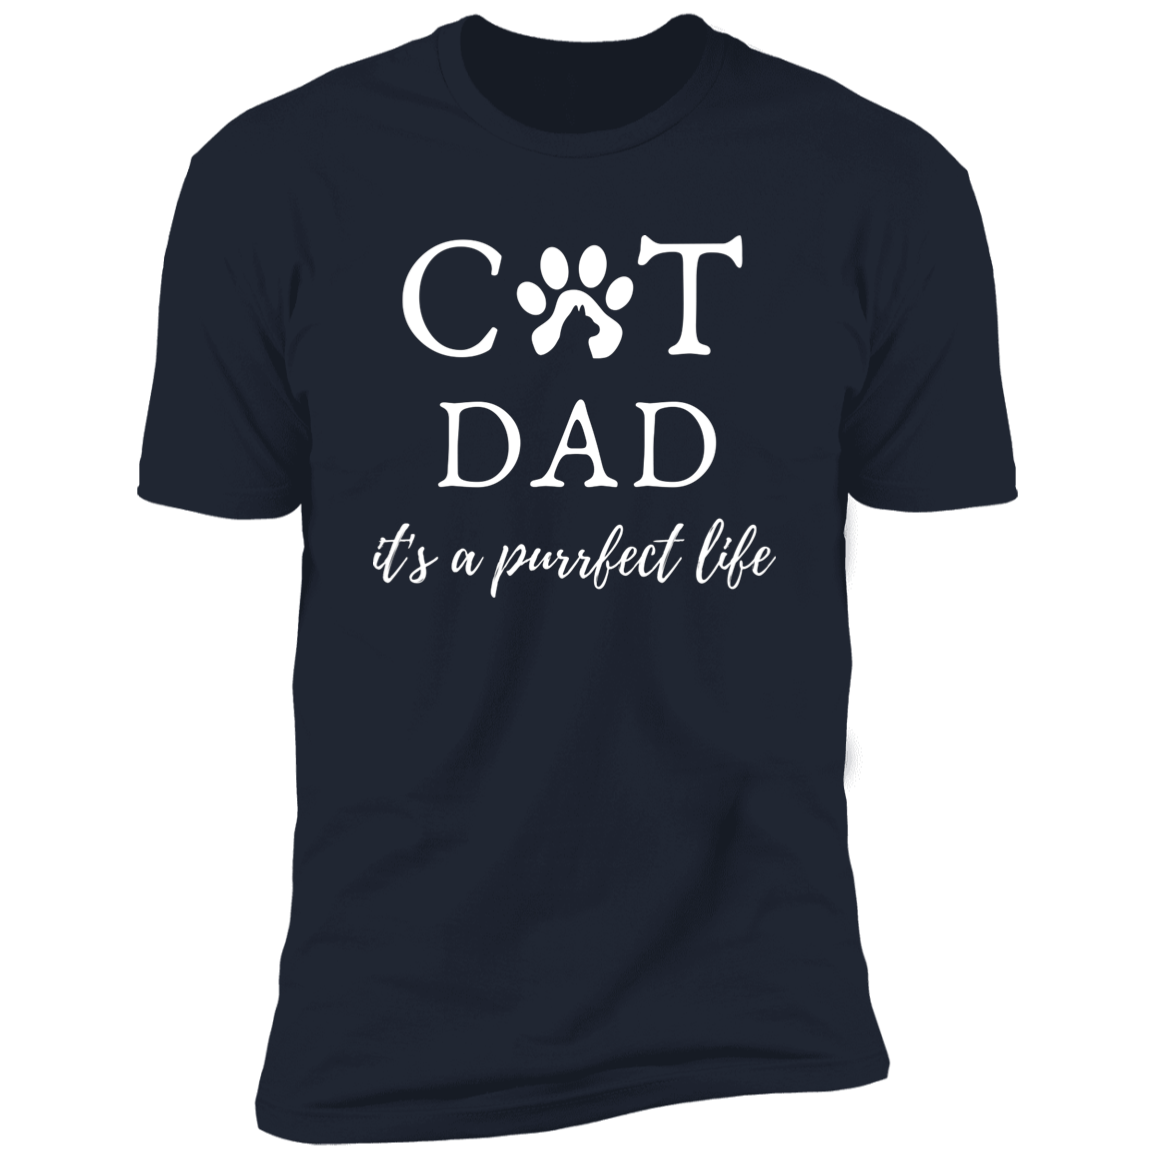 Cat Dad It's a Purrfect Life T-shirt, Cat Dad Shirt for humans, in navy blue